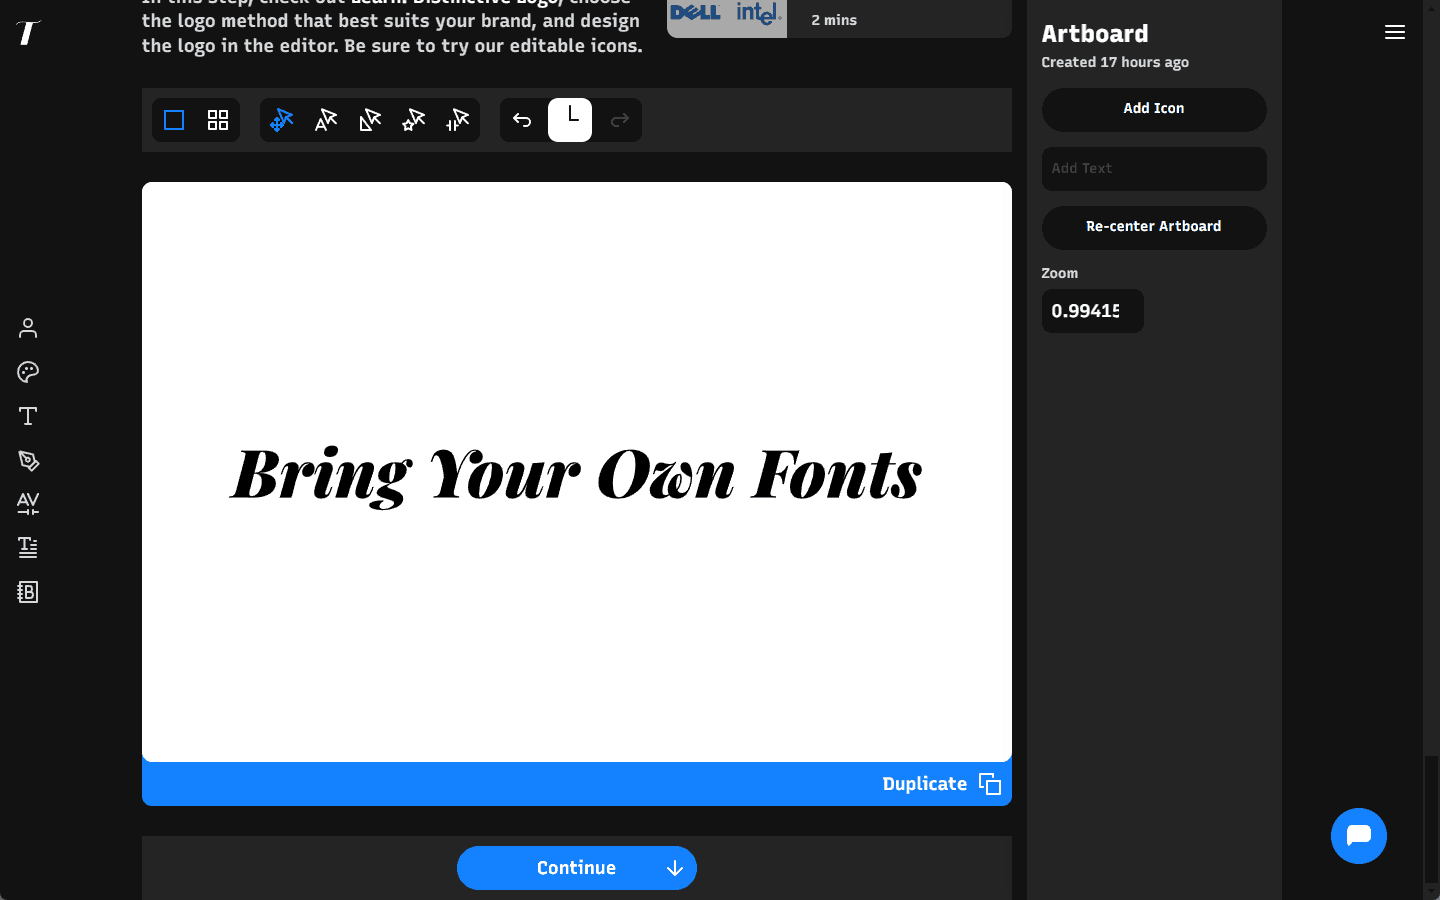 image: Drag and drop your chosen font file onto any text to apply it instantly on the artboard.